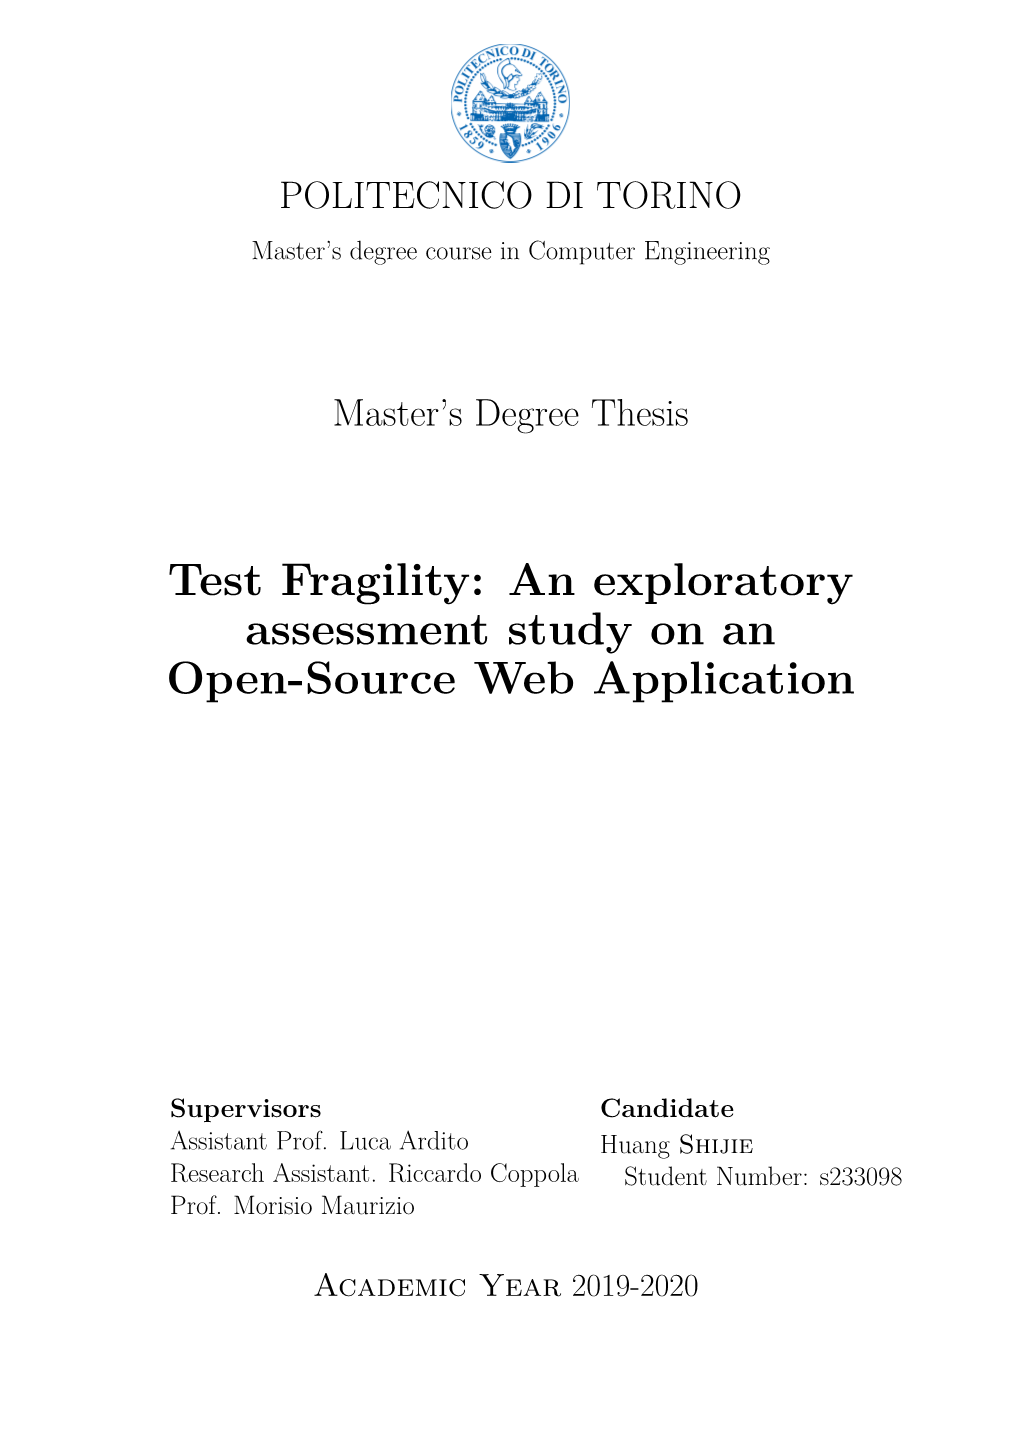 An Exploratory Assessment Study on an Open-Source Web Application